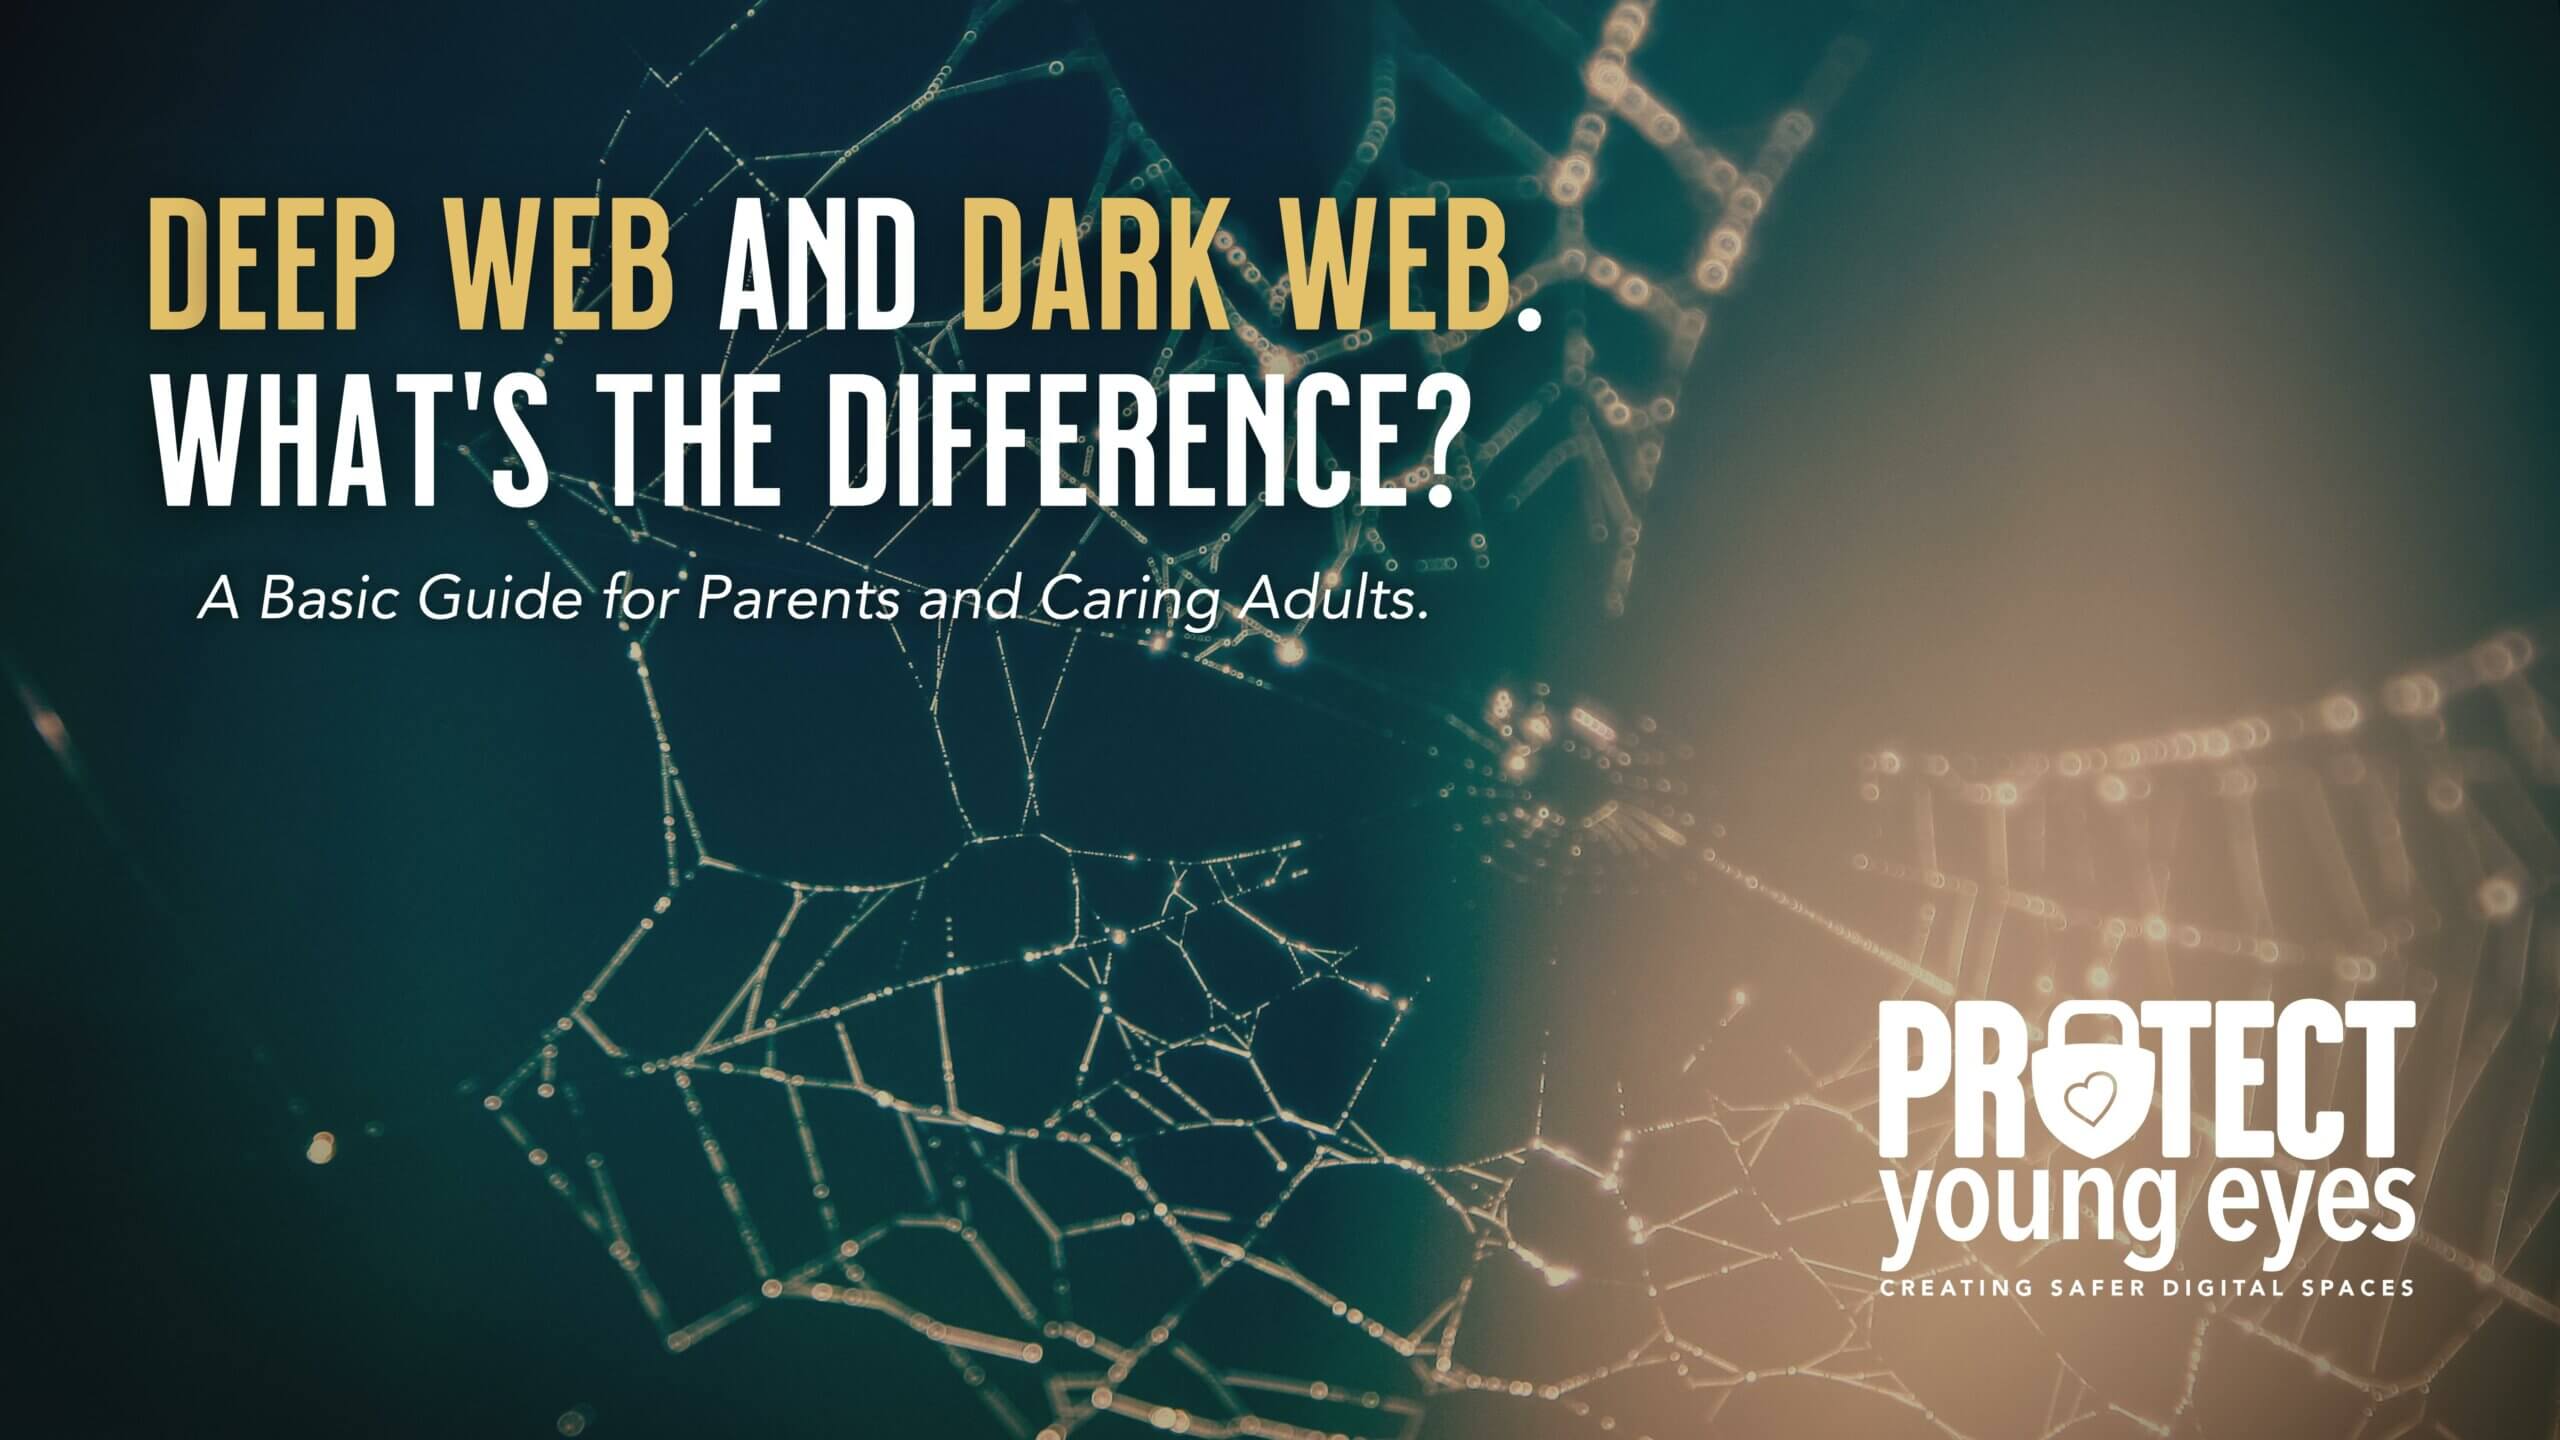 How to find porn on the dark web - Quora